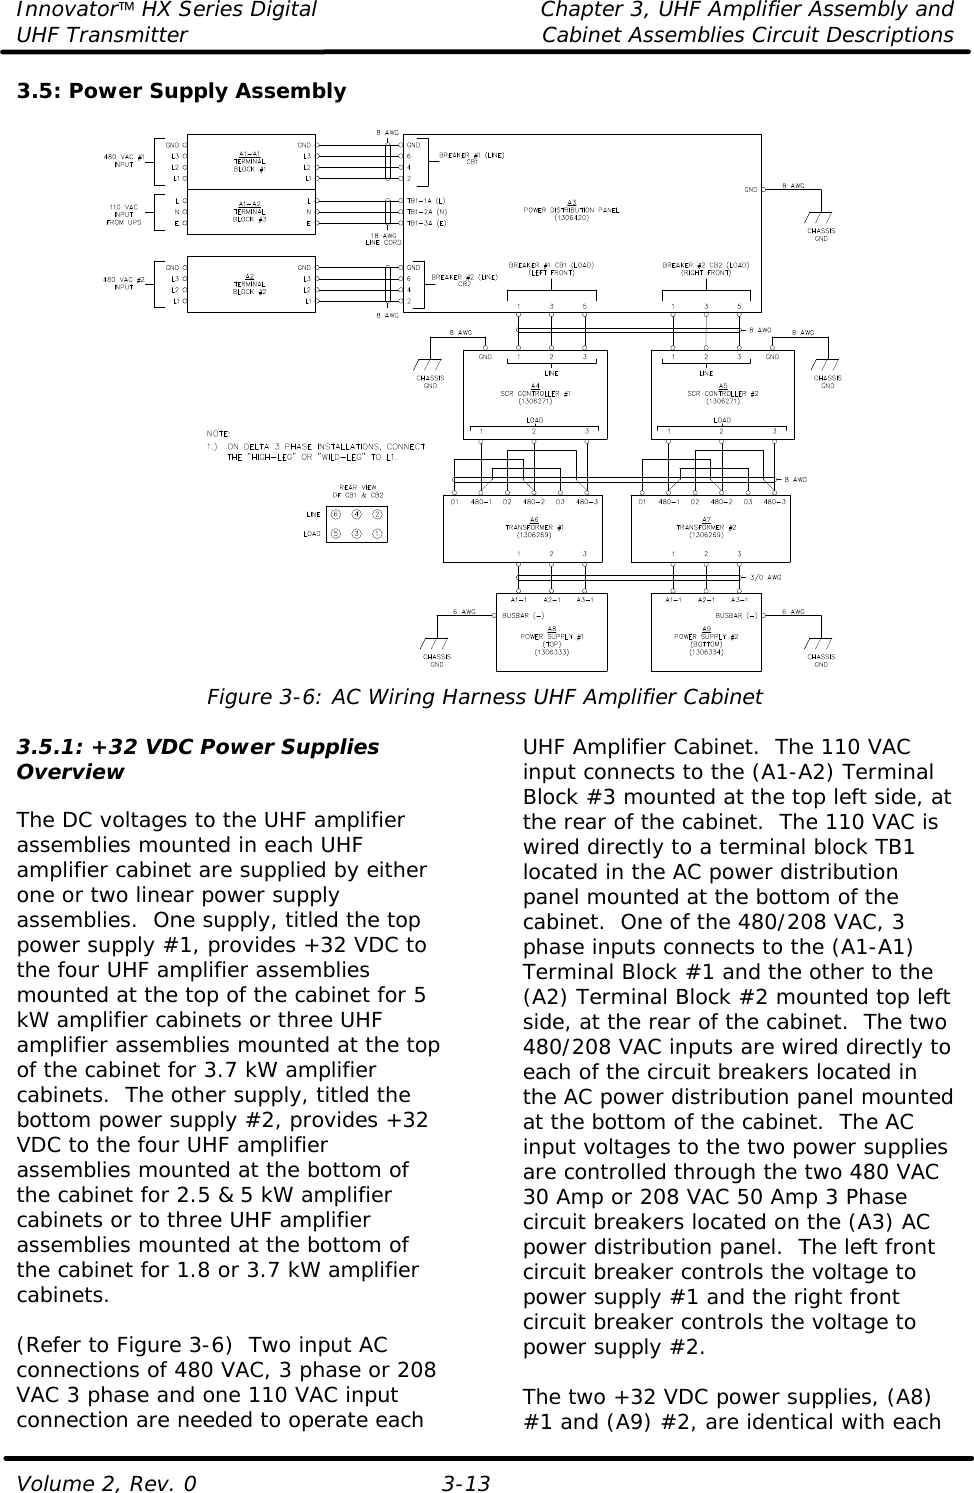 Innovator HX Series Digital Chapter 3, UHF Amplifier Assembly and UHF Transmitter Cabinet Assemblies Circuit Descriptions  Volume 2, Rev. 0 3-13 3.5: Power Supply Assembly   Figure 3-6: AC Wiring Harness UHF Amplifier Cabinet  3.5.1: +32 VDC Power Supplies Overview  The DC voltages to the UHF amplifier assemblies mounted in each UHF amplifier cabinet are supplied by either one or two linear power supply assemblies.  One supply, titled the top power supply #1, provides +32 VDC to the four UHF amplifier assemblies mounted at the top of the cabinet for 5 kW amplifier cabinets or three UHF amplifier assemblies mounted at the top of the cabinet for 3.7 kW amplifier cabinets.  The other supply, titled the bottom power supply #2, provides +32 VDC to the four UHF amplifier assemblies mounted at the bottom of the cabinet for 2.5 &amp; 5 kW amplifier cabinets or to three UHF amplifier assemblies mounted at the bottom of the cabinet for 1.8 or 3.7 kW amplifier cabinets.  (Refer to Figure 3-6)  Two input AC connections of 480 VAC, 3 phase or 208 VAC 3 phase and one 110 VAC input connection are needed to operate each UHF Amplifier Cabinet.  The 110 VAC input connects to the (A1-A2) Terminal Block #3 mounted at the top left side, at the rear of the cabinet.  The 110 VAC is wired directly to a terminal block TB1 located in the AC power distribution panel mounted at the bottom of the cabinet.  One of the 480/208 VAC, 3 phase inputs connects to the (A1-A1) Terminal Block #1 and the other to the (A2) Terminal Block #2 mounted top left side, at the rear of the cabinet.  The two 480/208 VAC inputs are wired directly to each of the circuit breakers located in the AC power distribution panel mounted at the bottom of the cabinet.  The AC input voltages to the two power supplies are controlled through the two 480 VAC 30 Amp or 208 VAC 50 Amp 3 Phase circuit breakers located on the (A3) AC power distribution panel.  The left front circuit breaker controls the voltage to power supply #1 and the right front circuit breaker controls the voltage to power supply #2.   The two +32 VDC power supplies, (A8) #1 and (A9) #2, are identical with each 